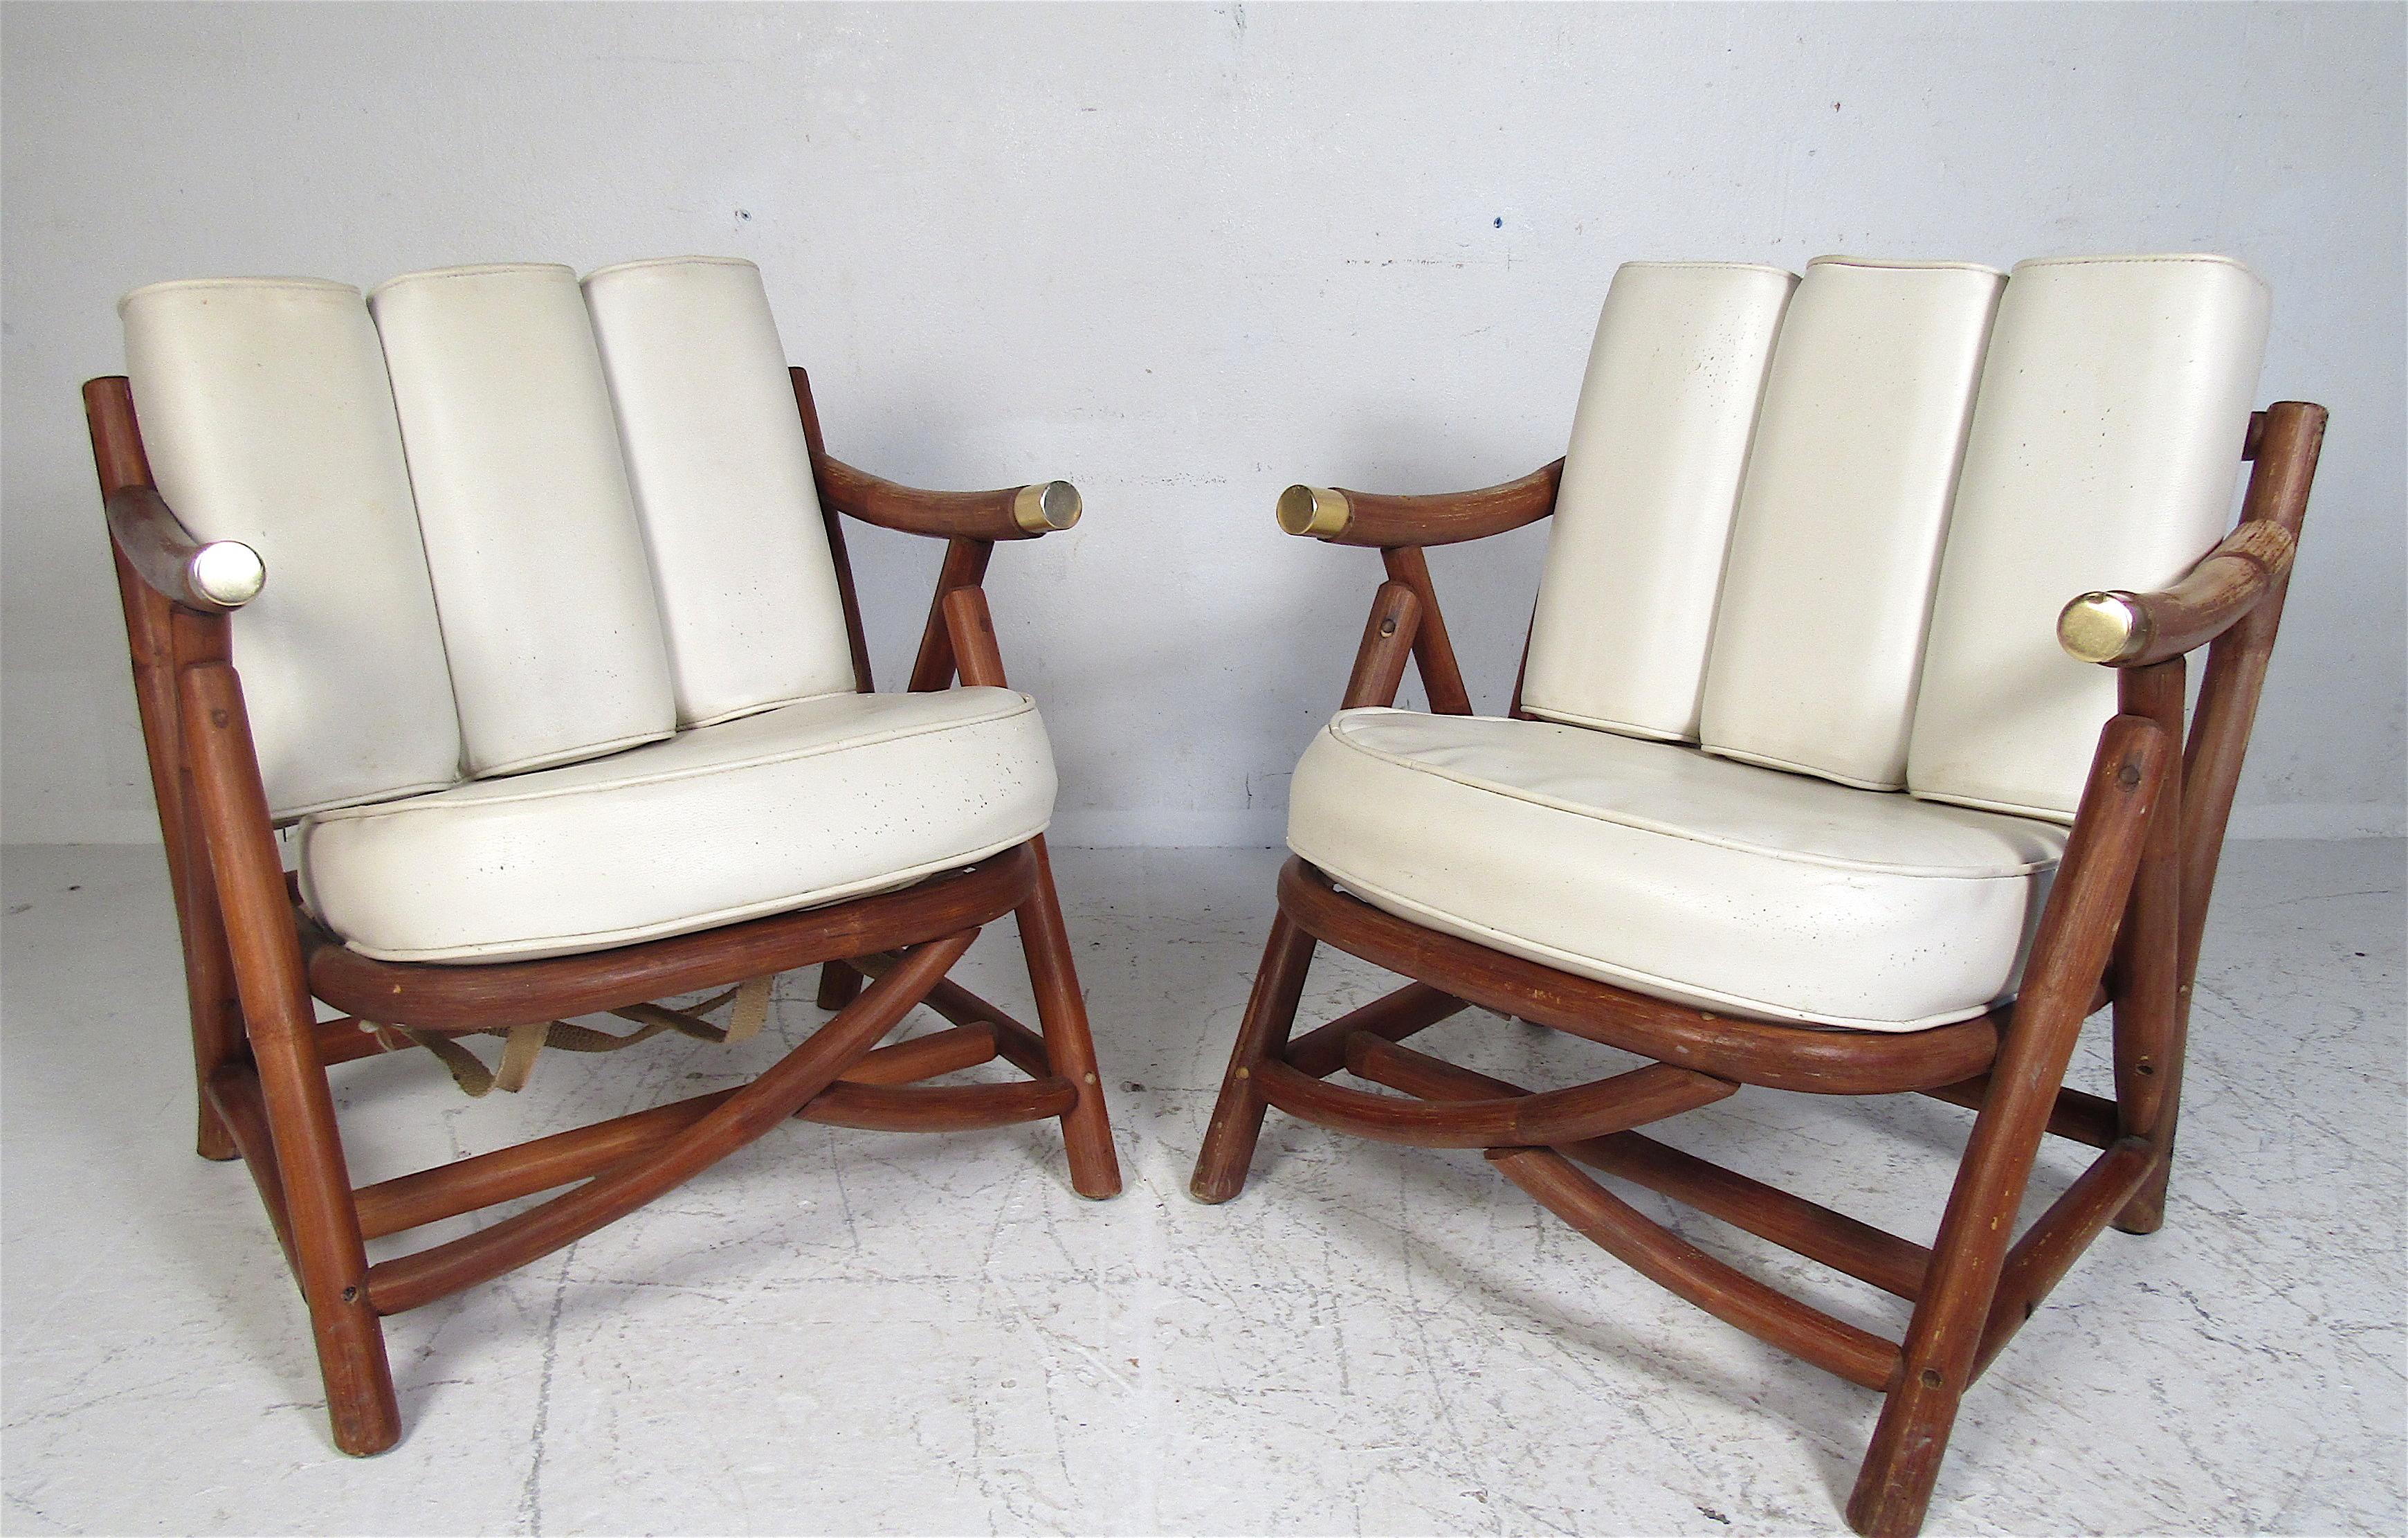 This unusual pair of vintage modern lounge chairs feature a cylindrical wood frame and two thick padded cushions. This sturdy and stylish pair ensures maximum comfort. The slatted backrest and brass capped armrests show true quality craftsmanship.